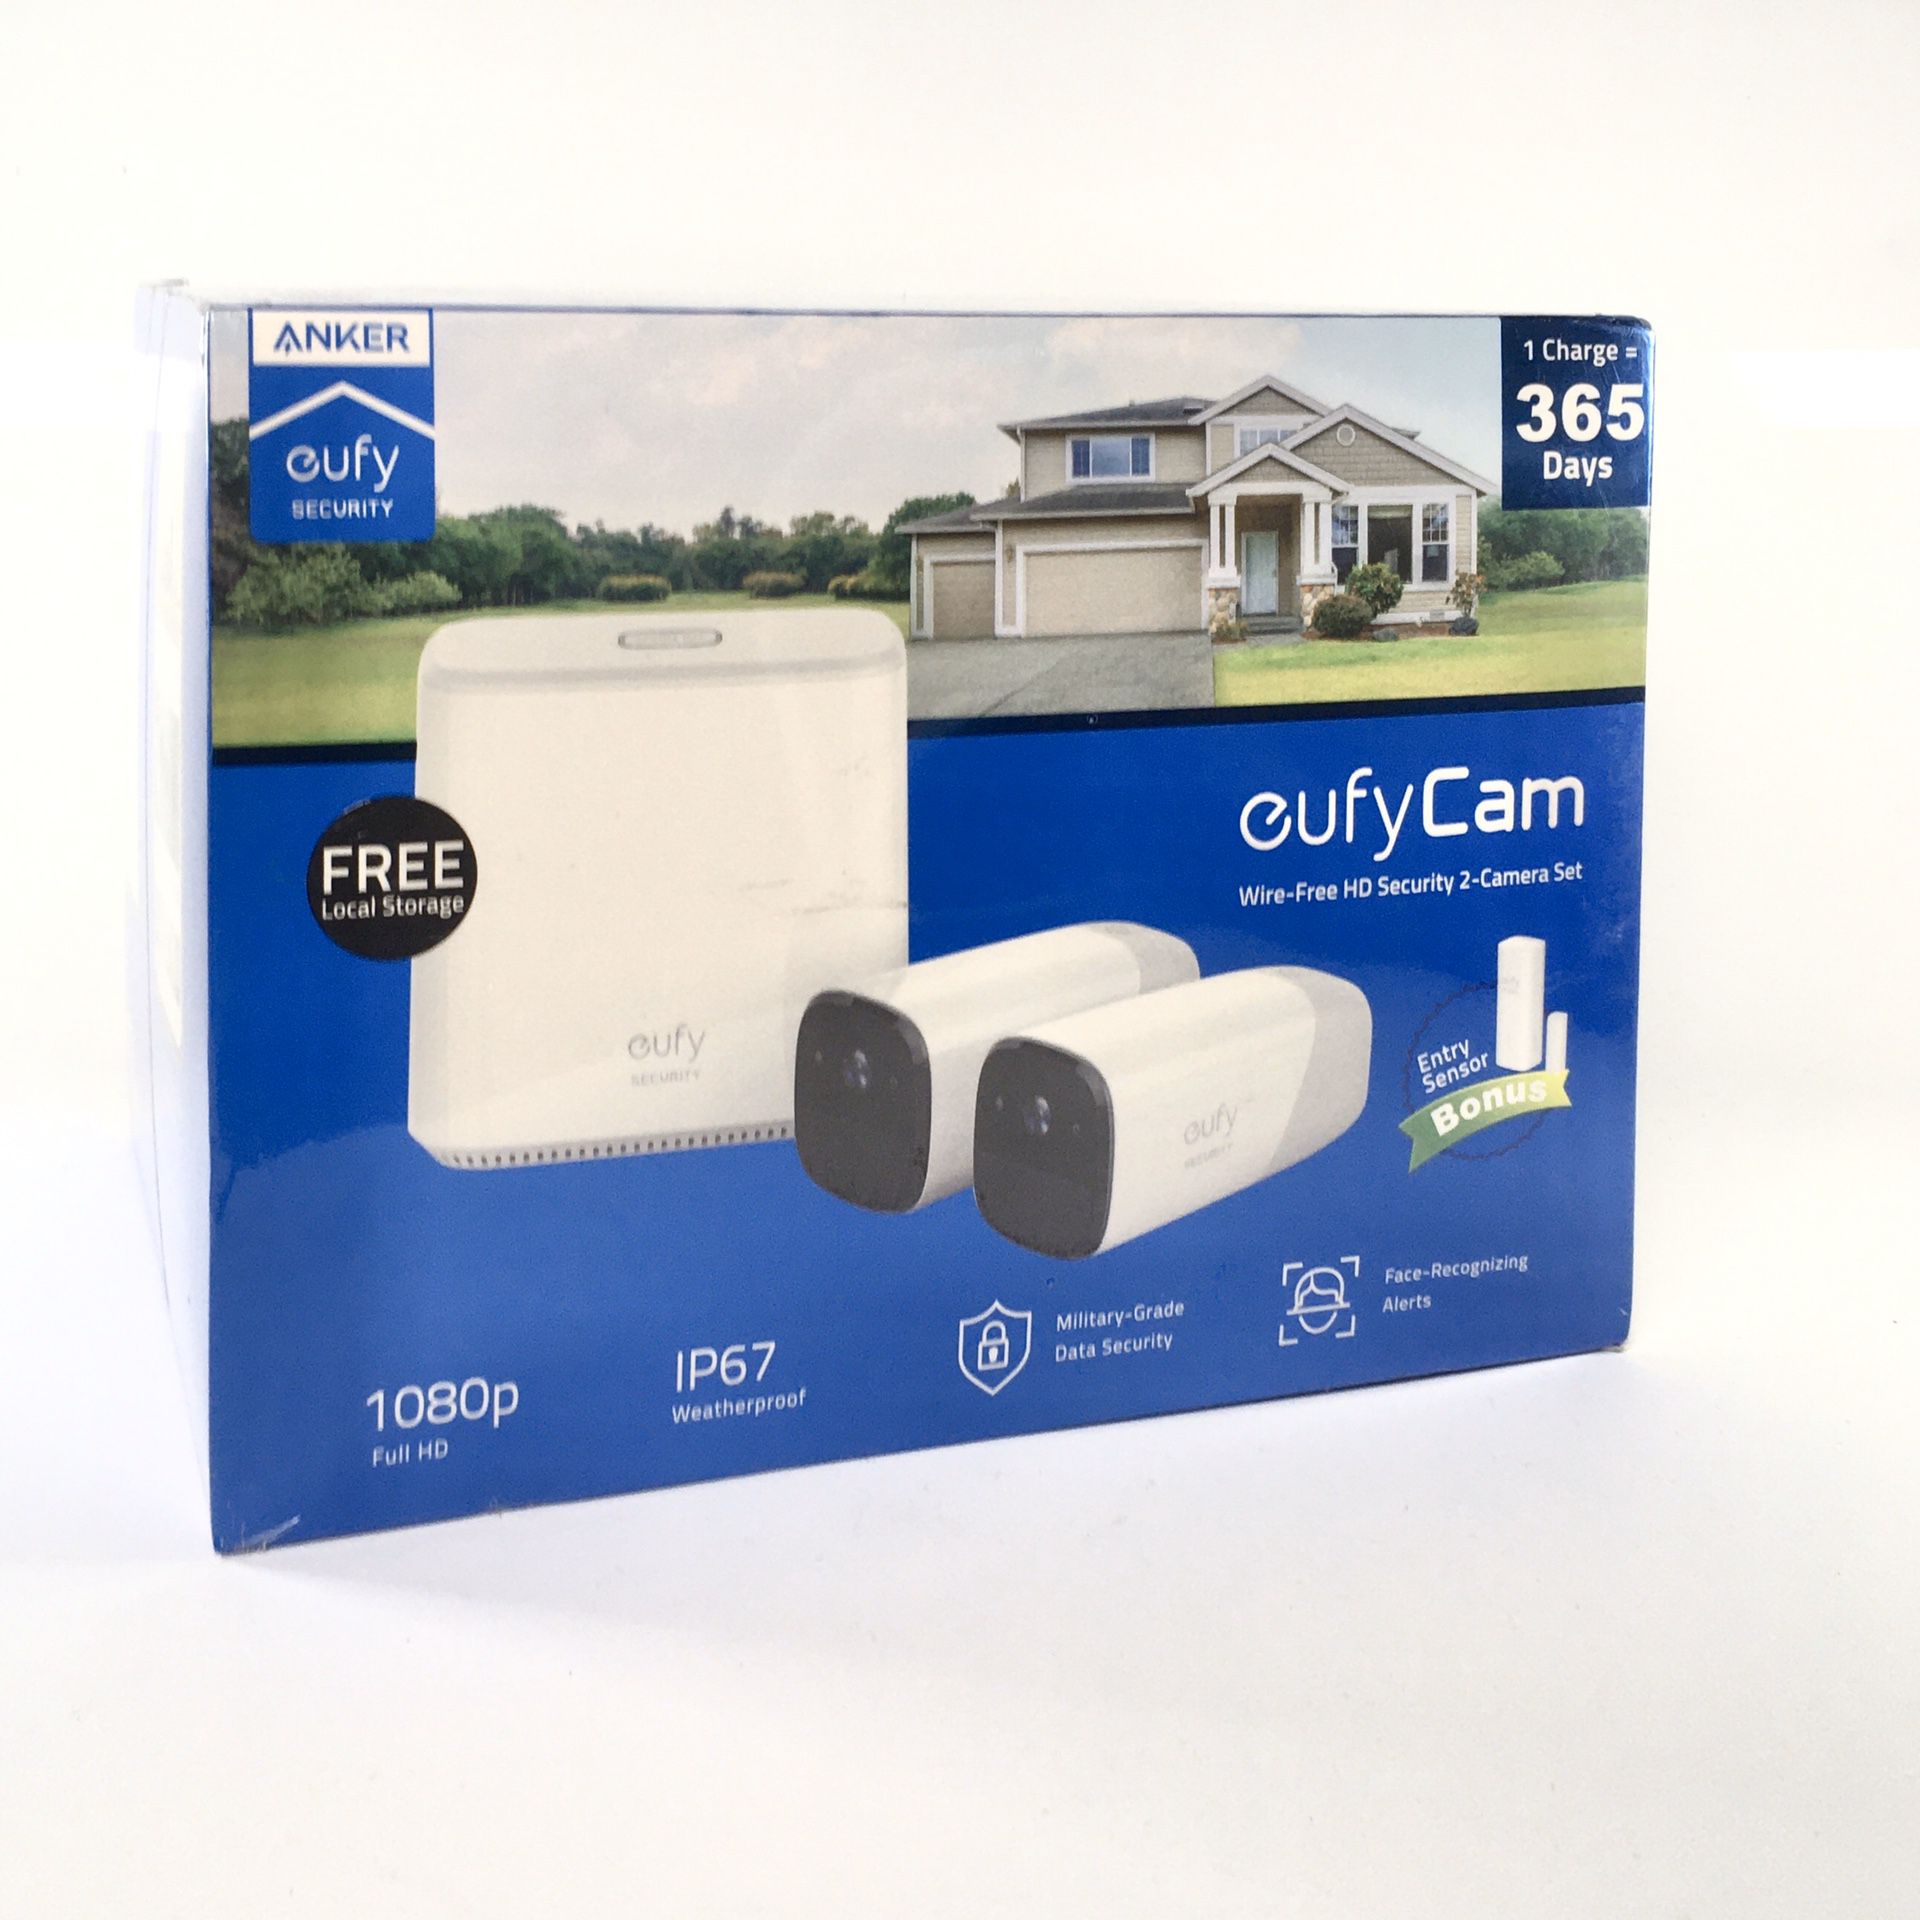 Eufy cam wire-free HD Security system 2 camera set hub and extender